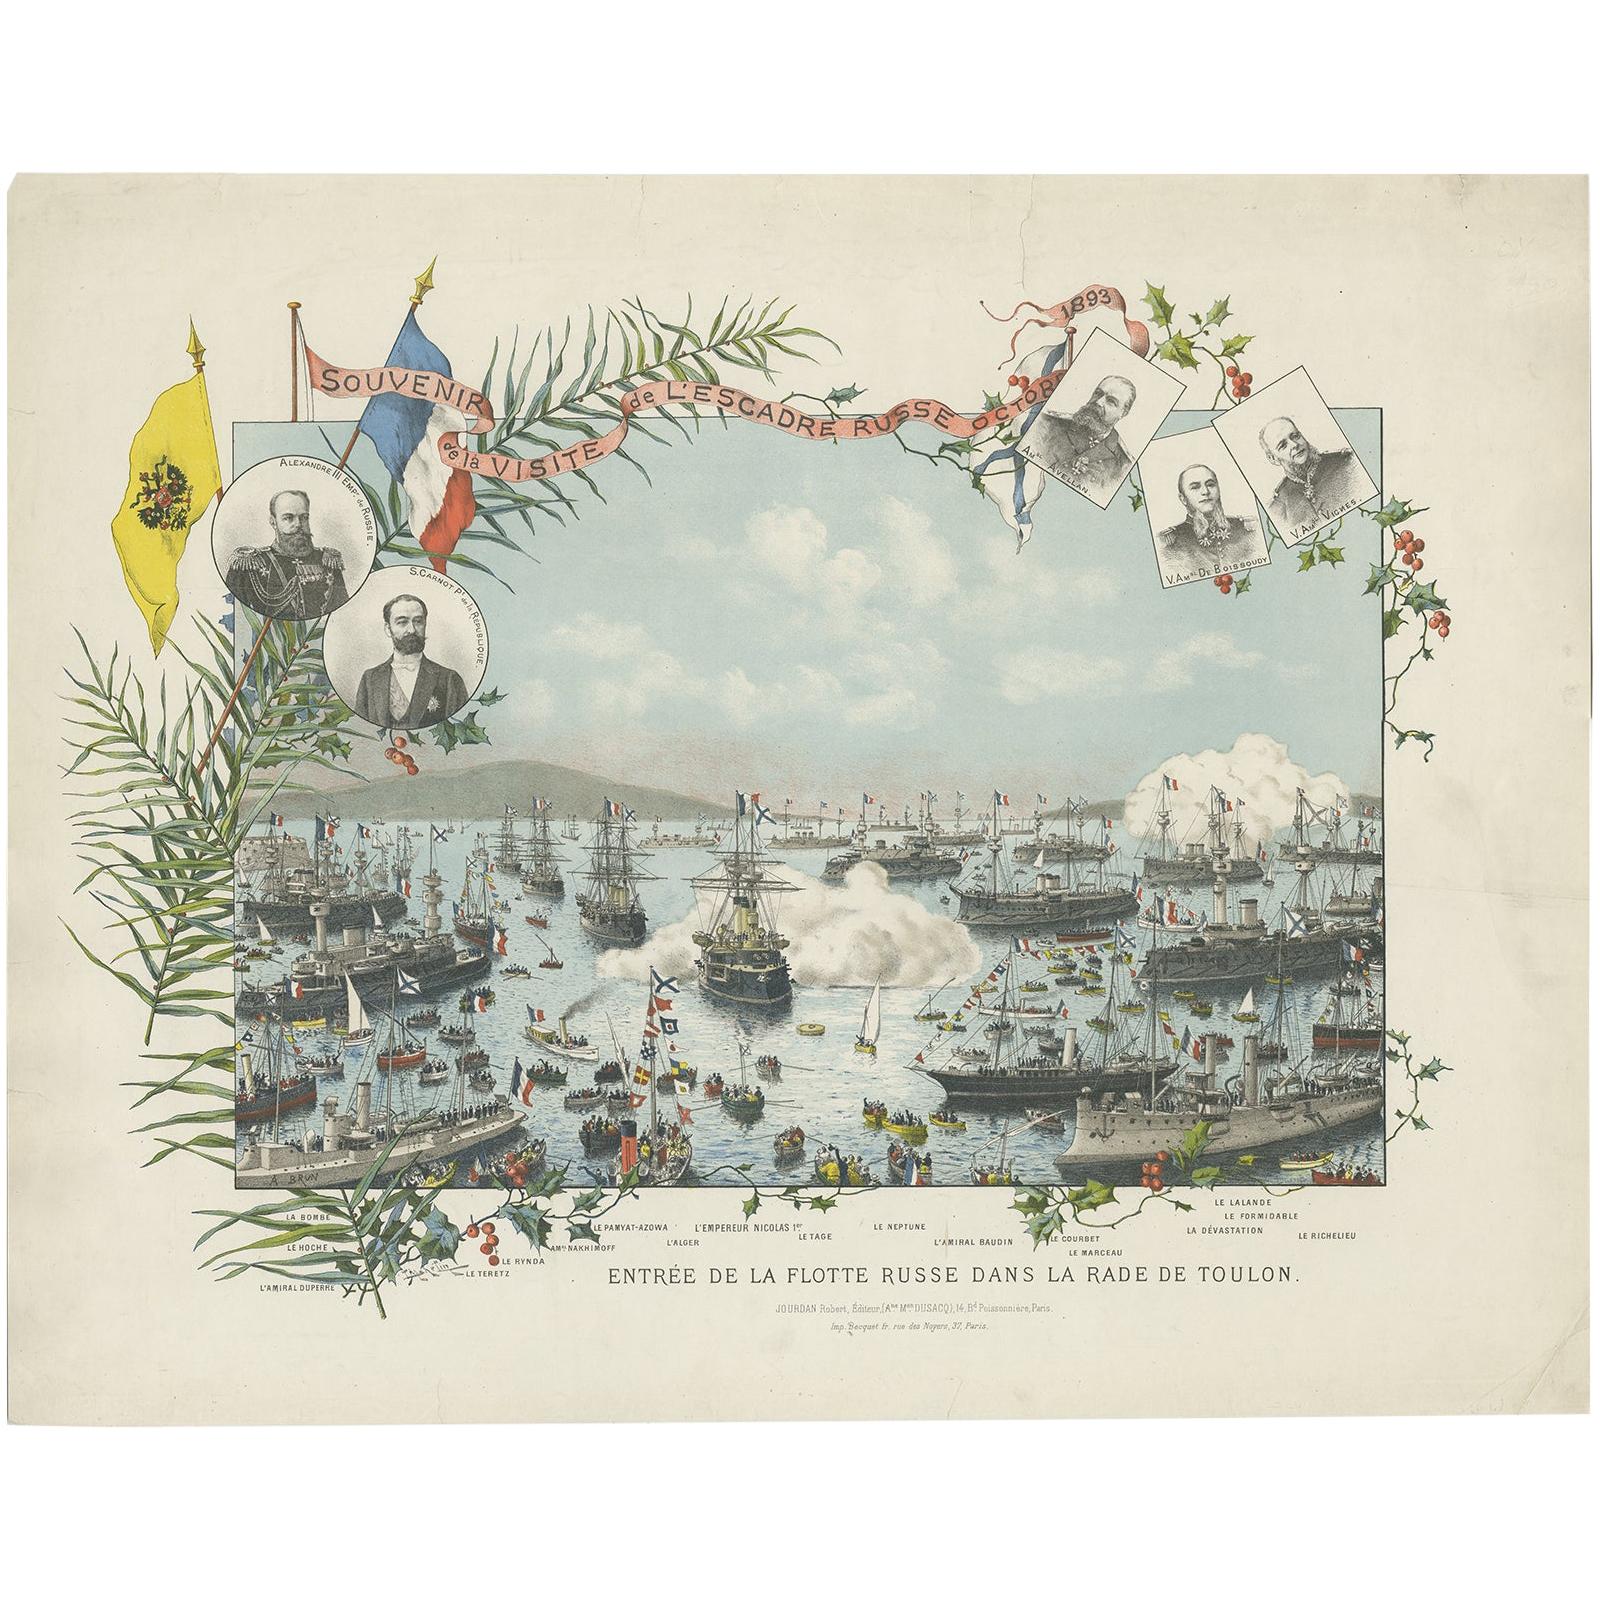 Antique Print of the Arrival of the Russian Squadron in Toulon, circa 1895